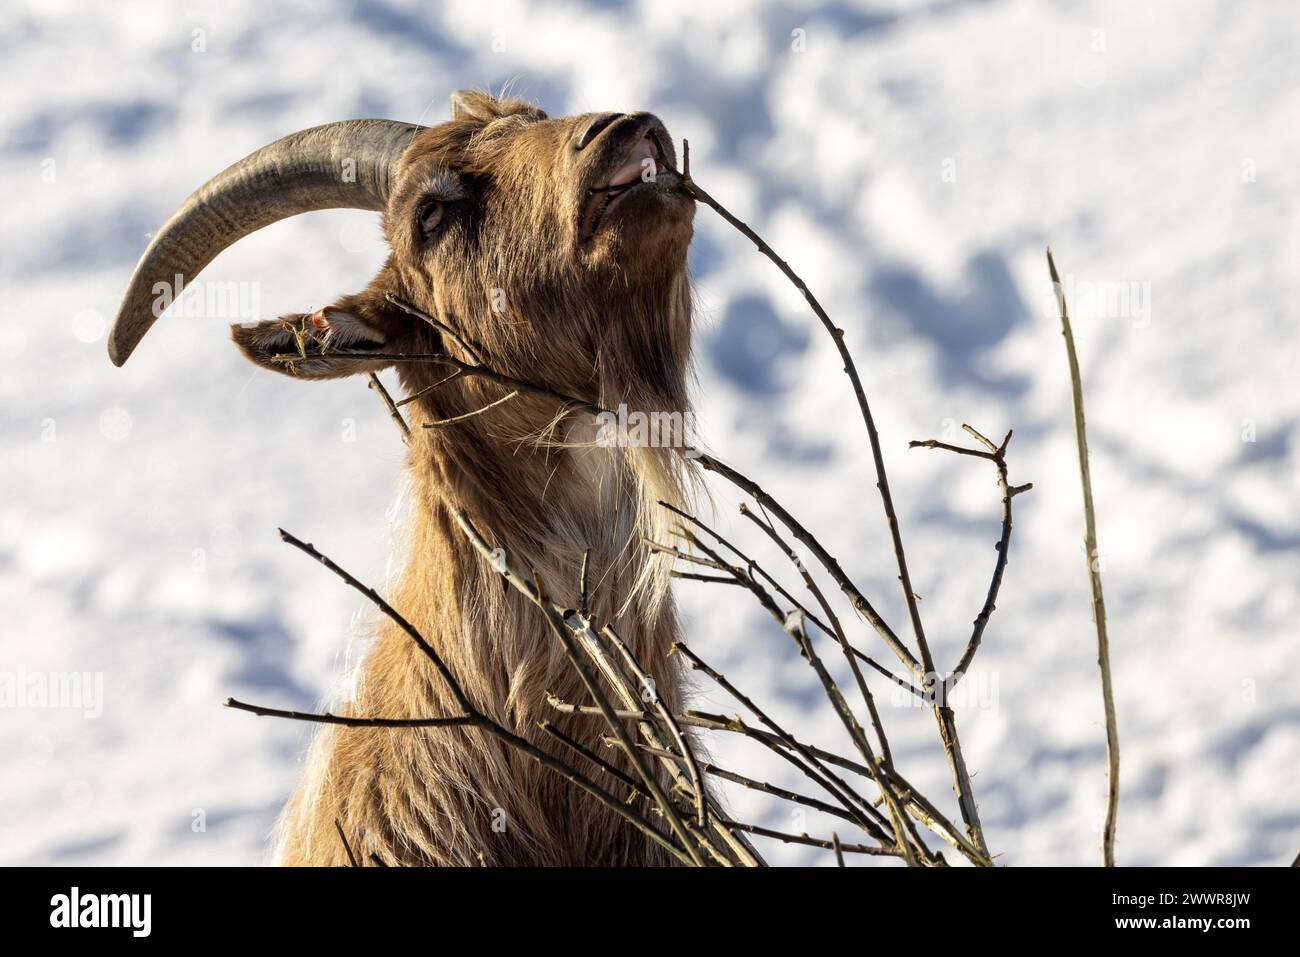 Scandinavian domestic goat feeding from branch with winter background Stock Photo